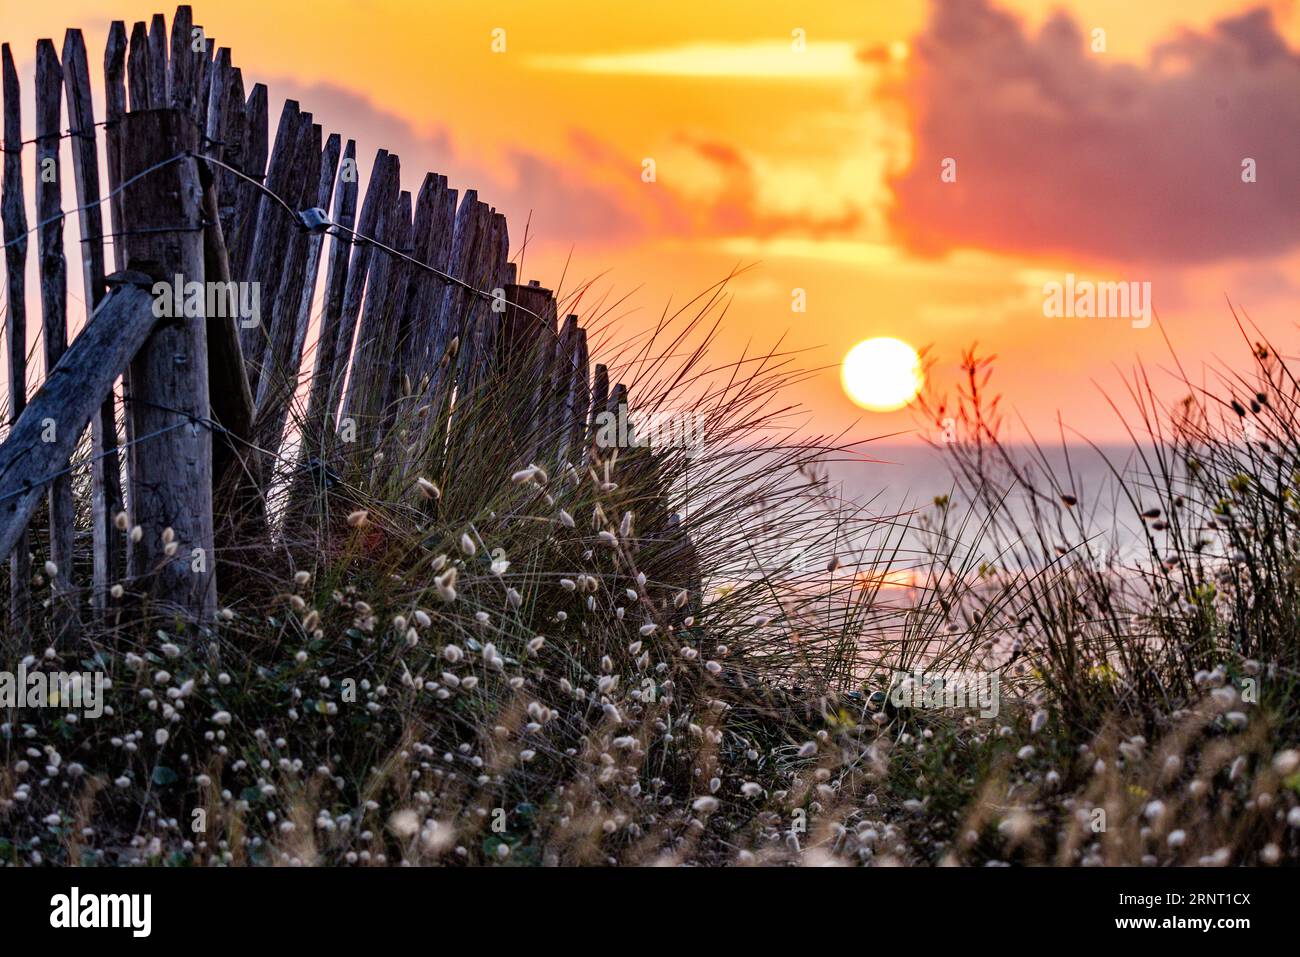 Beach, sea, dune landscape with the regionally typical wooden picket fence at sunset, Portbail, Cotentin, Manche, Normandy, France Stock Photo